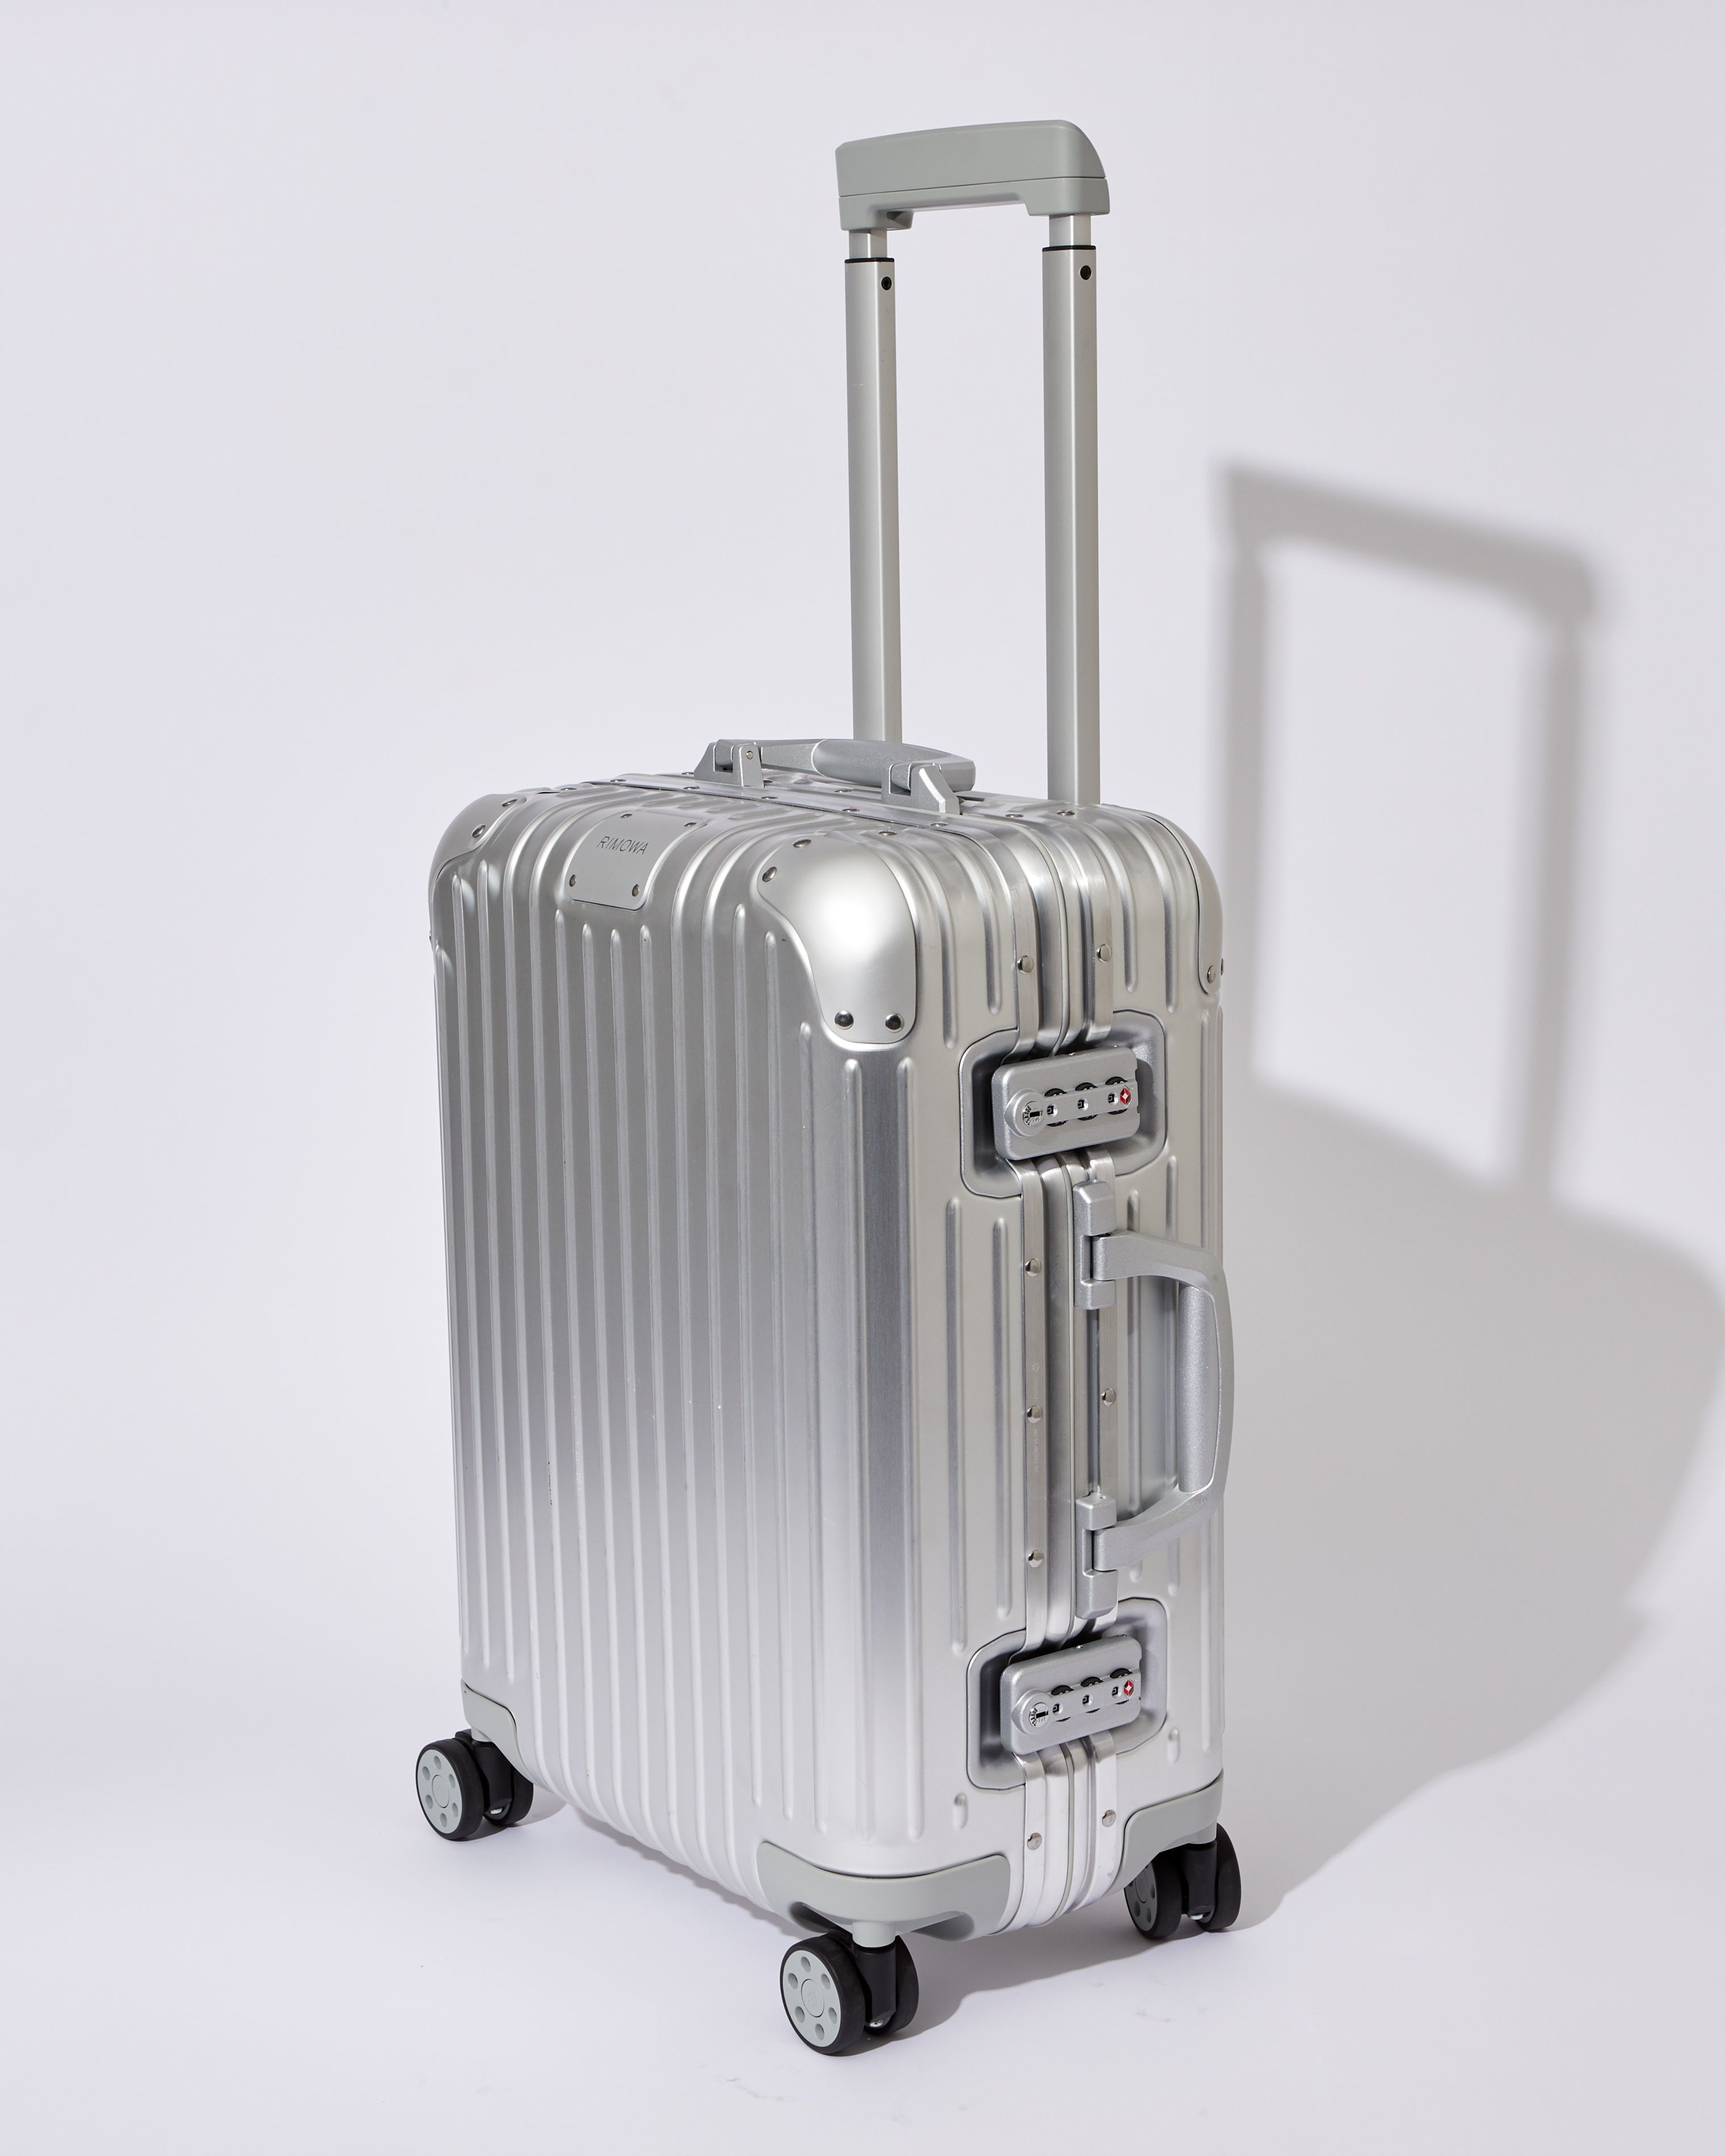 Hard Or Soft-Sided Hand Luggage? - Which?